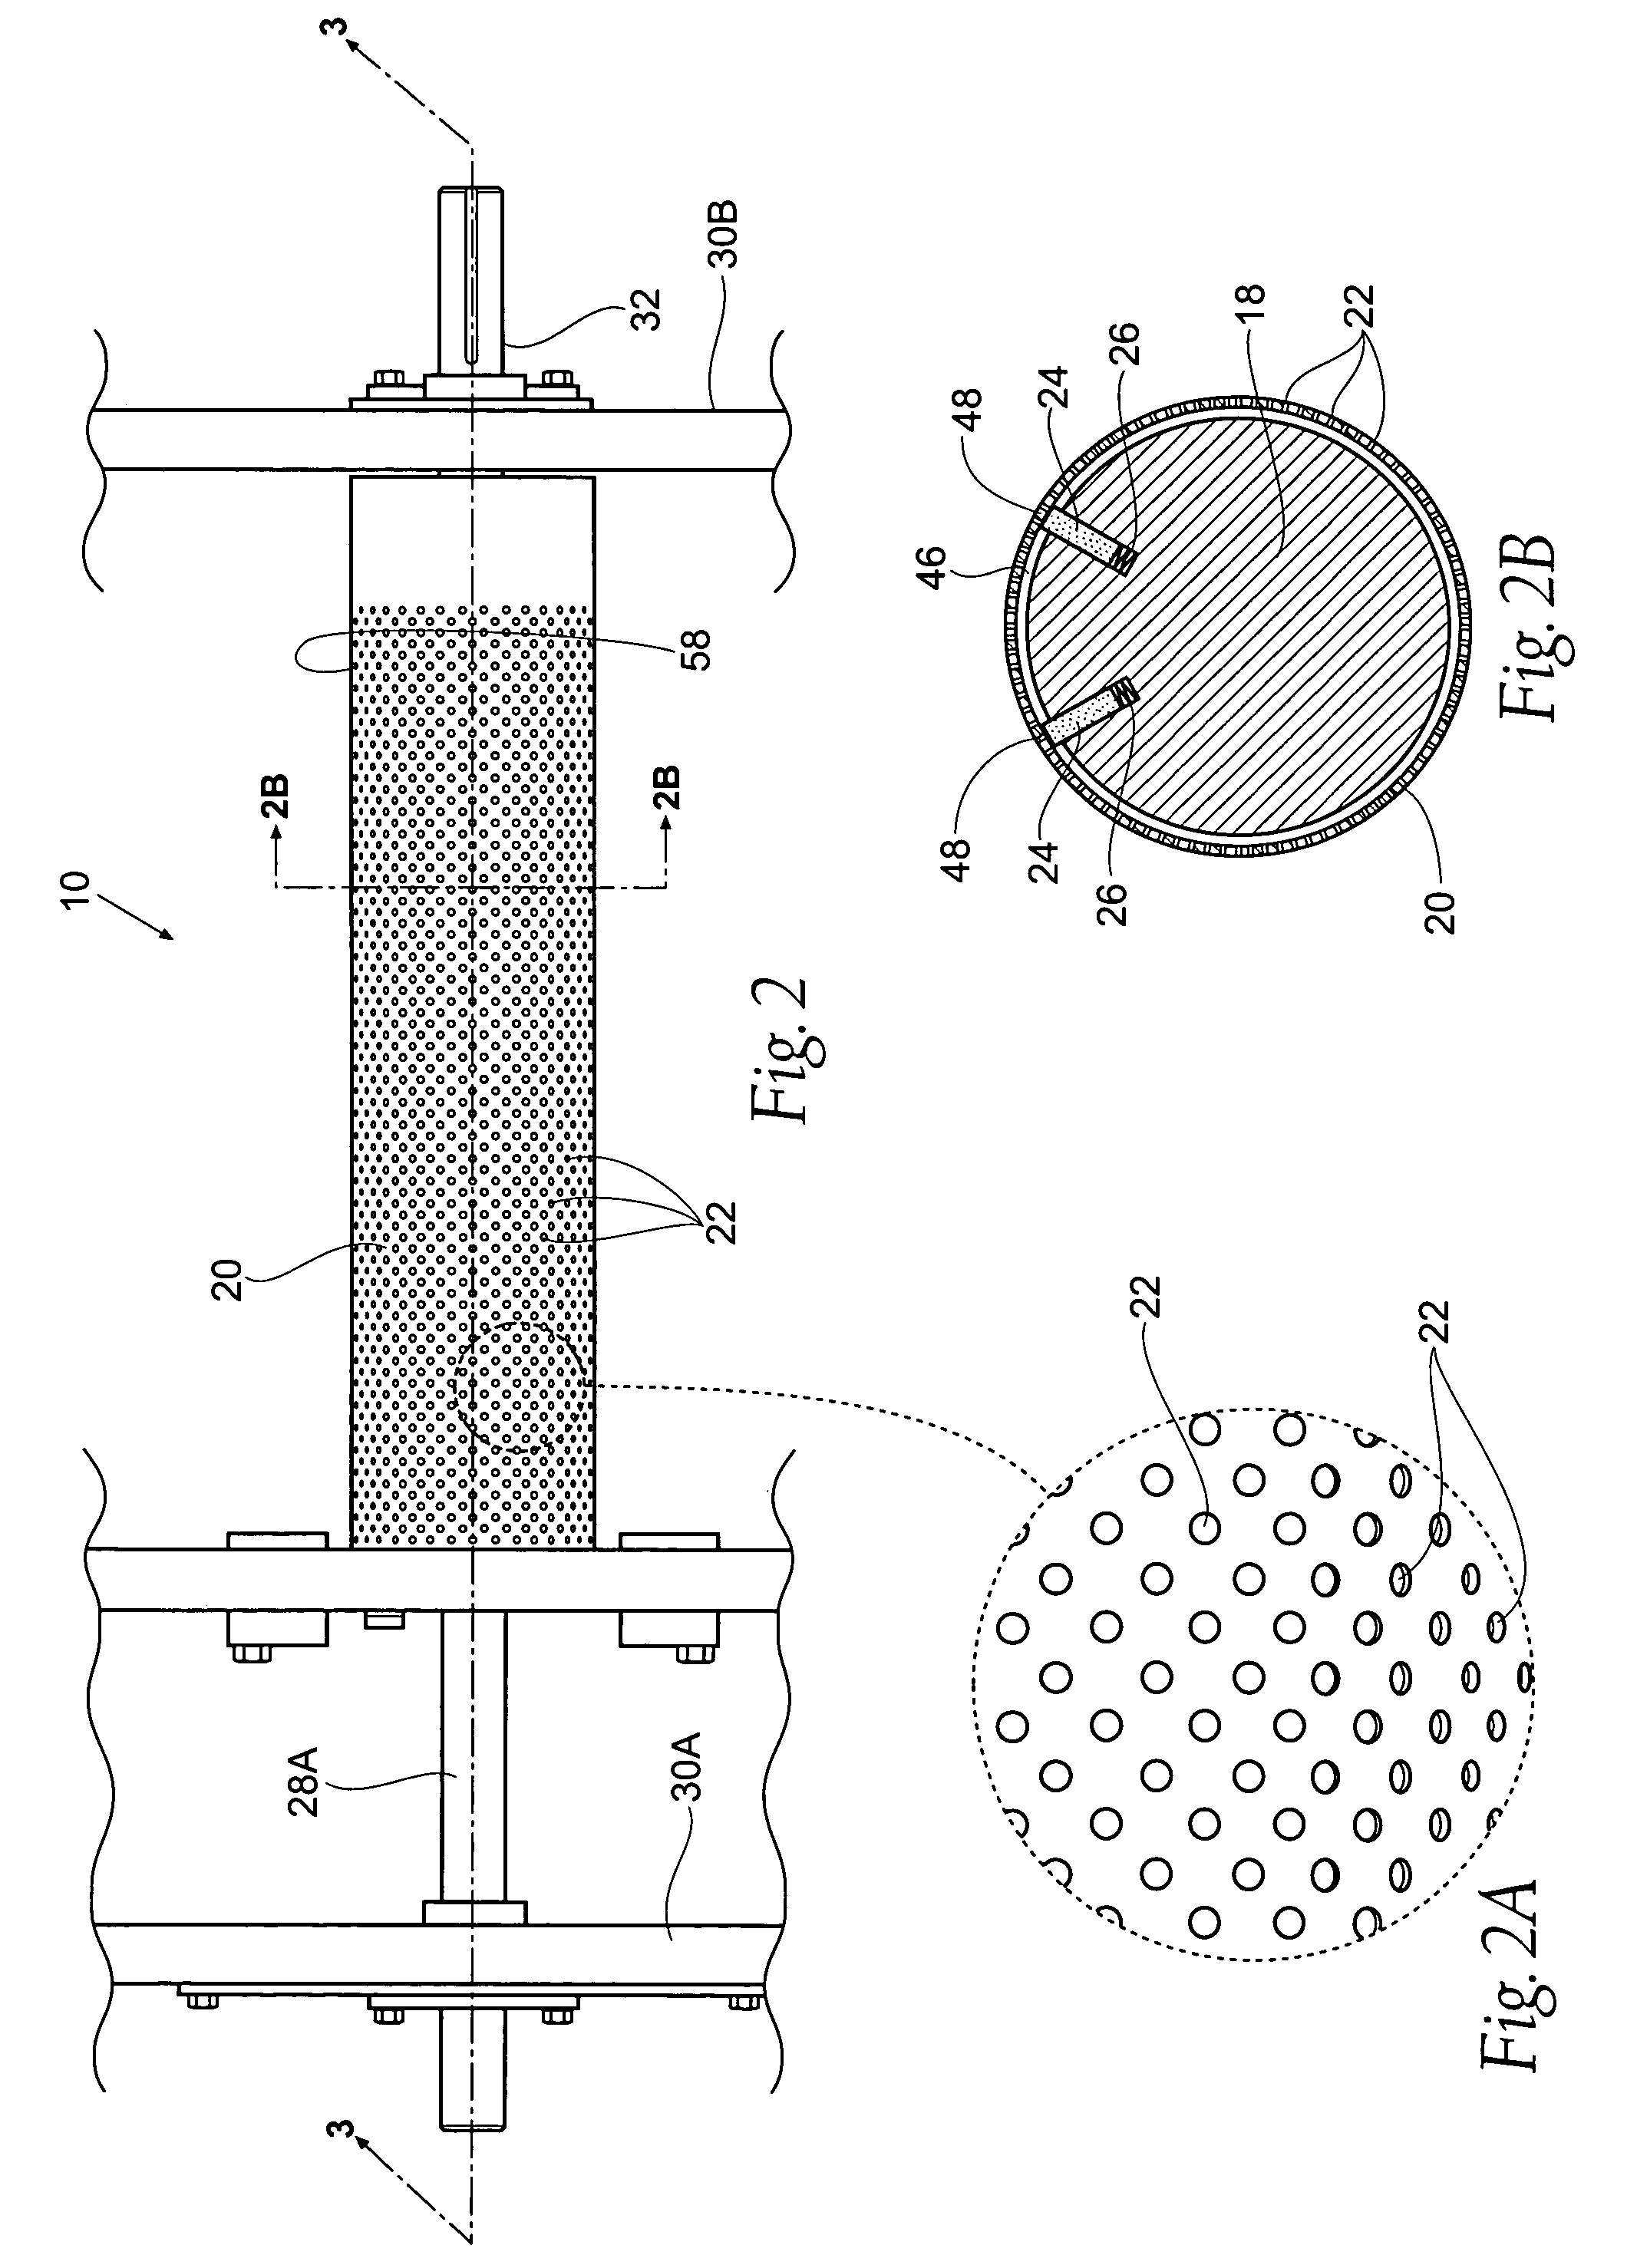 Method and apparatus for treating sheets including a vacuum roller for retaining sheets in curved configuration